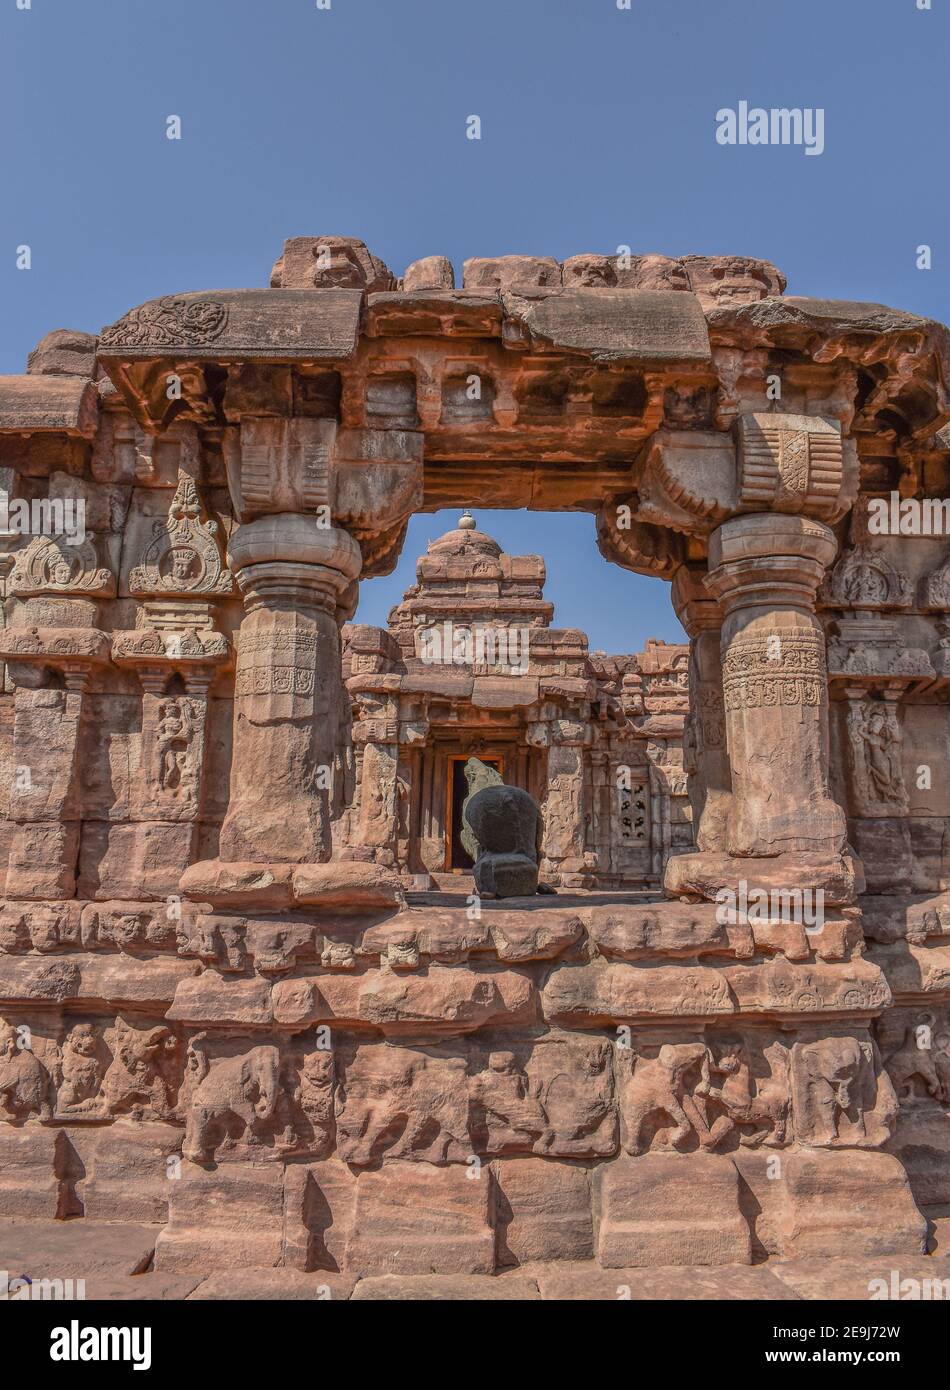 pattadakal temple a valley of red soil.South Indian temples with Indian rock cut architecture in karnataka near Badami city . Stock Photo